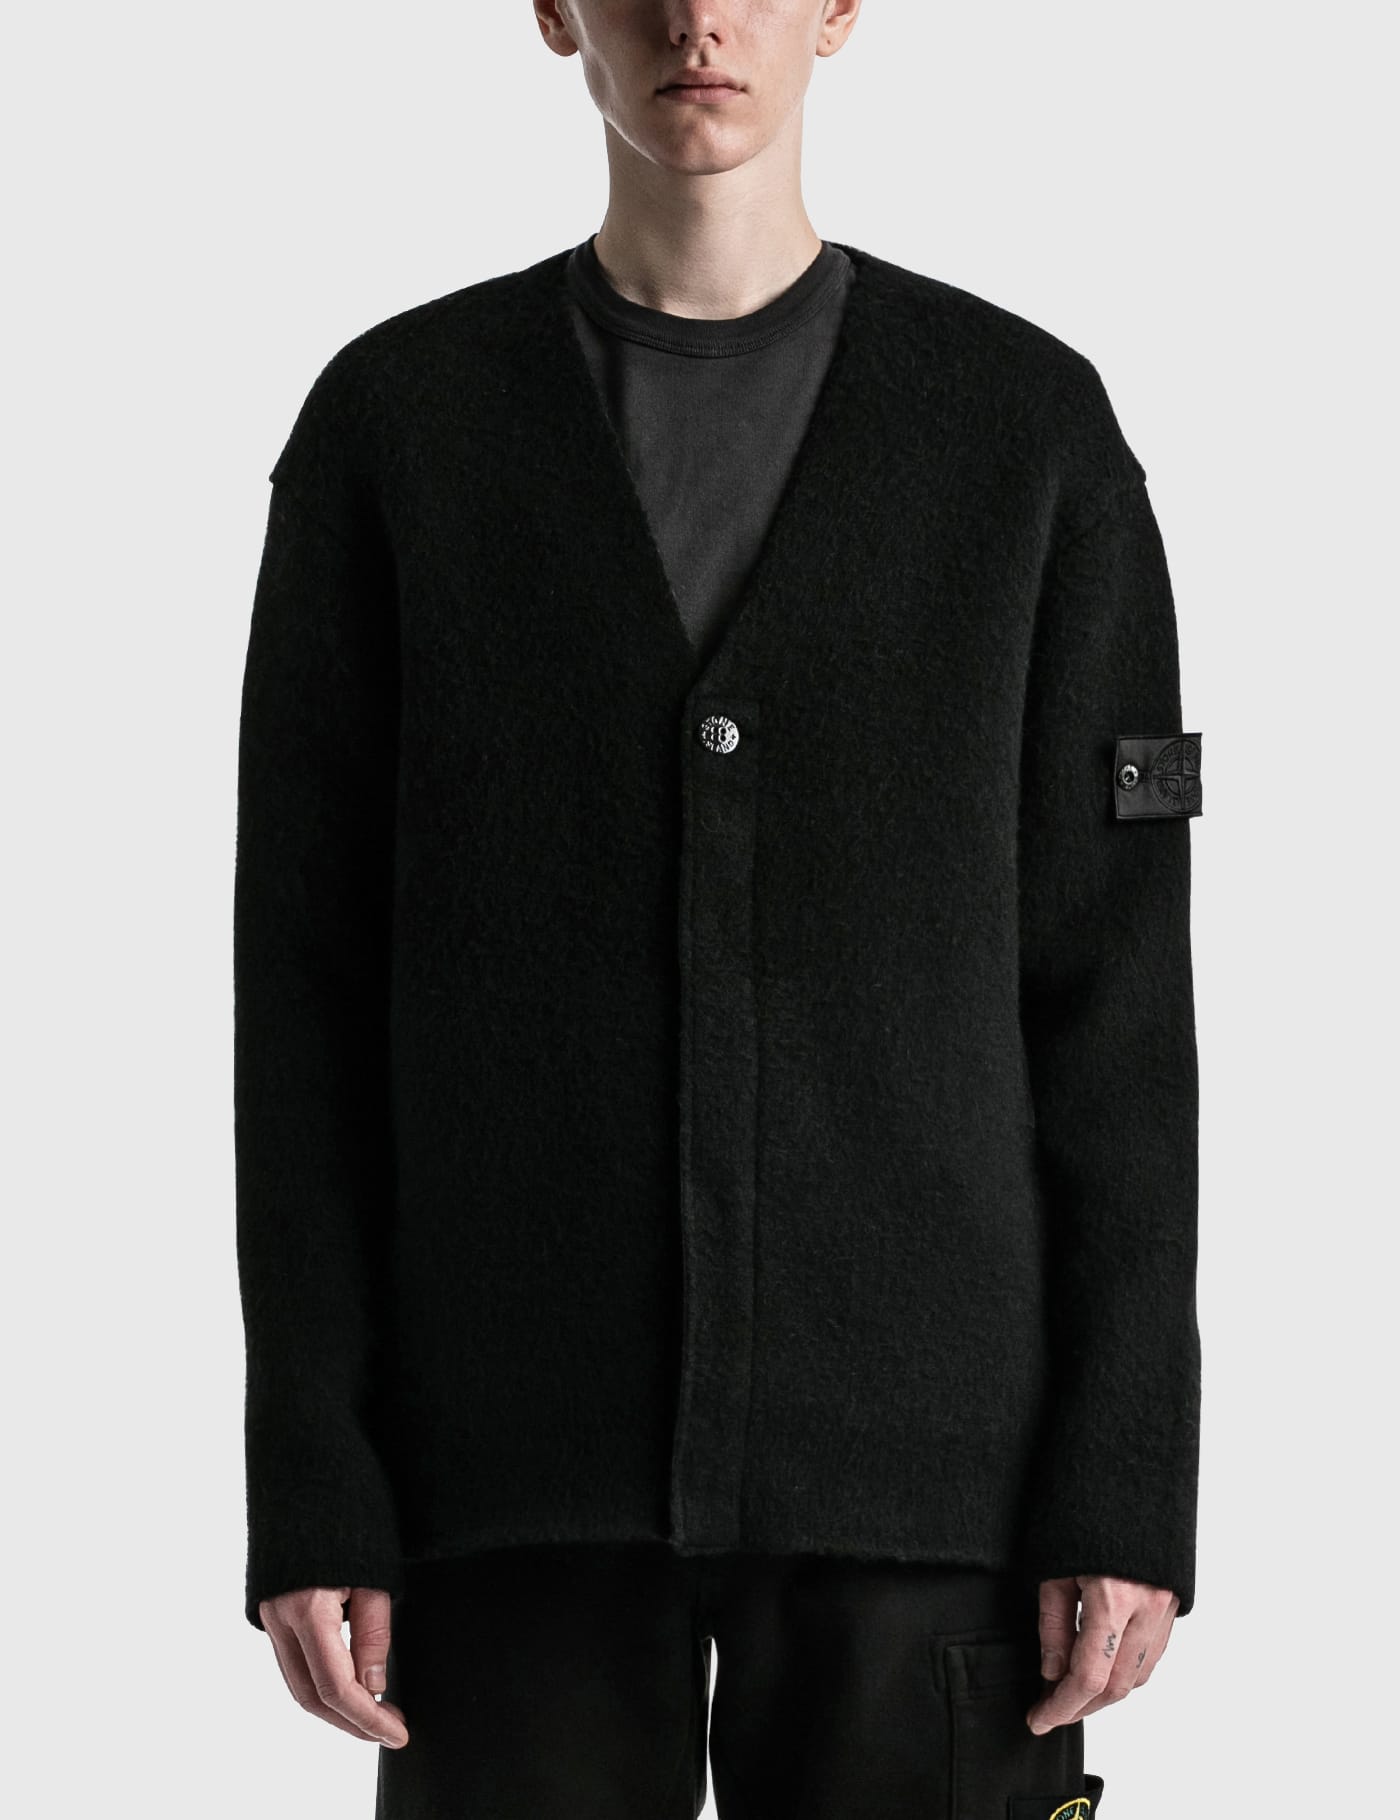 Stone Island Shadow Project - Knit Jacket | HBX - Globally Curated Fashion  and Lifestyle by Hypebeast